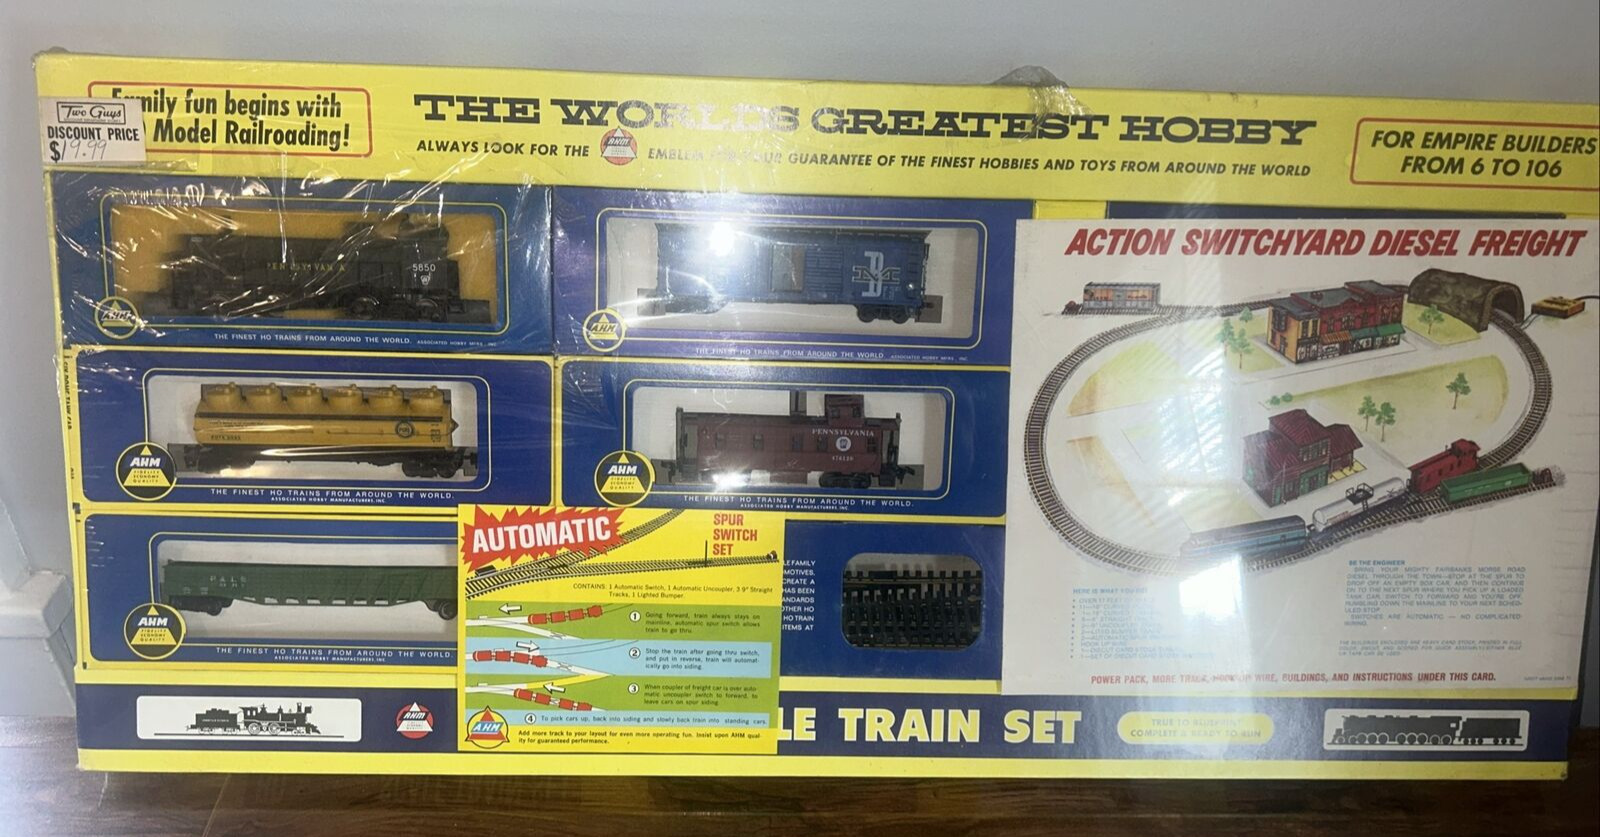 AHM HO Scale Train Set - Action Switchyard Diesel Freight Set 68032A New Sealed